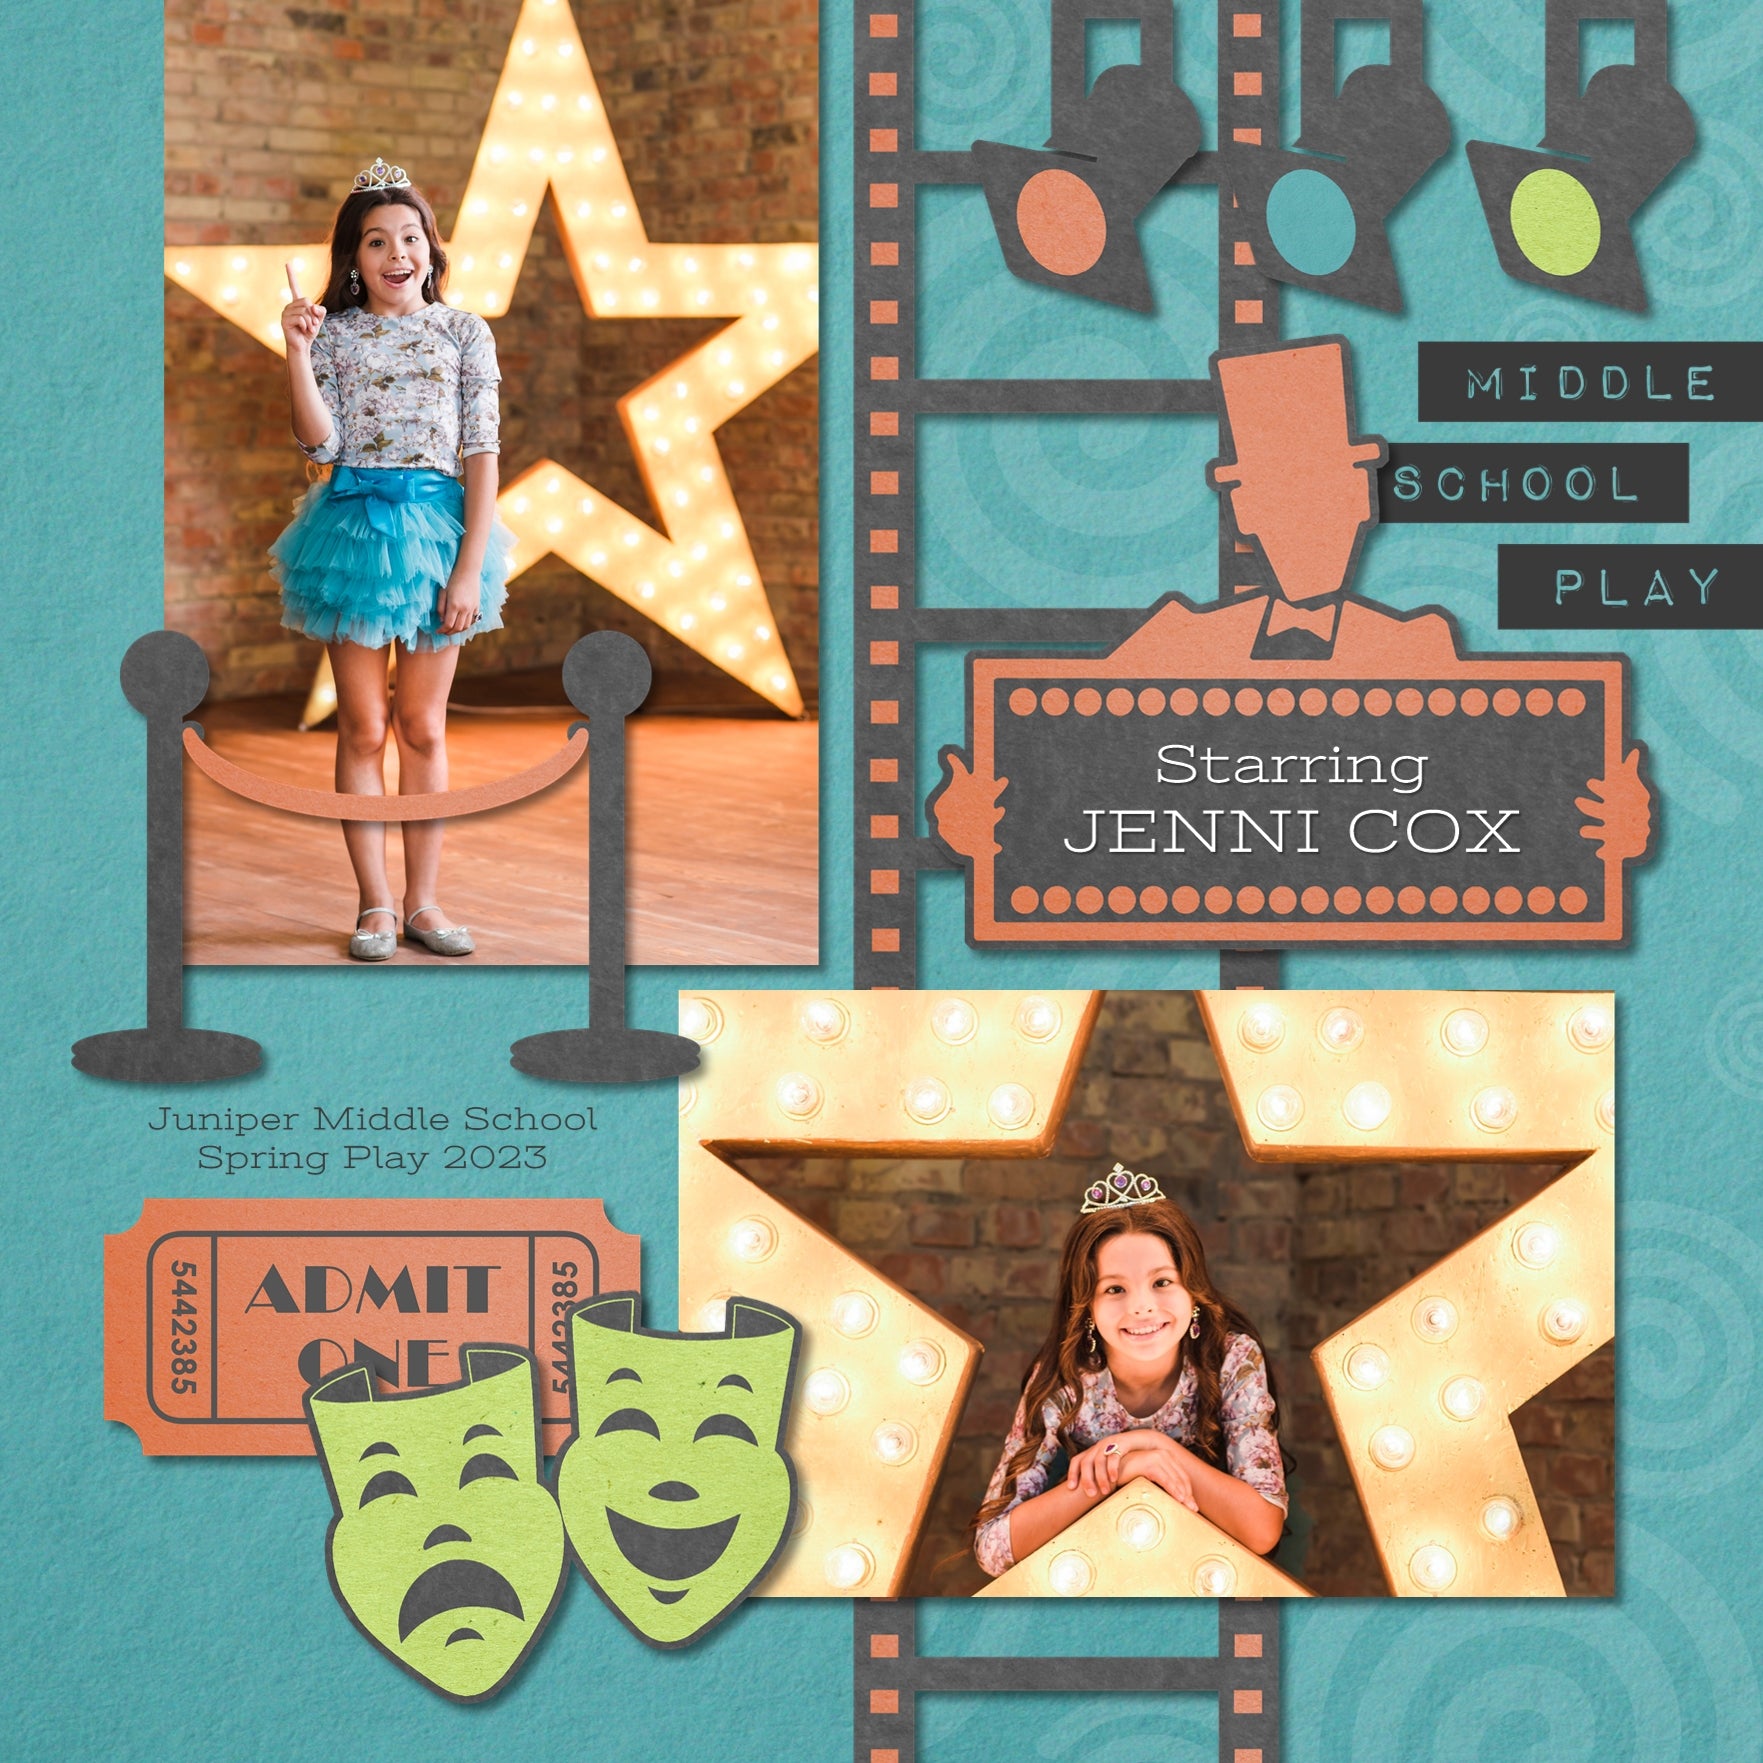 The All School Theater Digital Scrapbook Kit by Lucky Girl Creative is full of school performance digital art embellishments which could be used for school theaters, music programs, and movie nights. This collection features bright, fun embellishments crafted with a silhouetted construction paper look. The All School Theater Digital Scrapbook Kit pairs perfectly with All School Band Digital Scrapbook Kit.